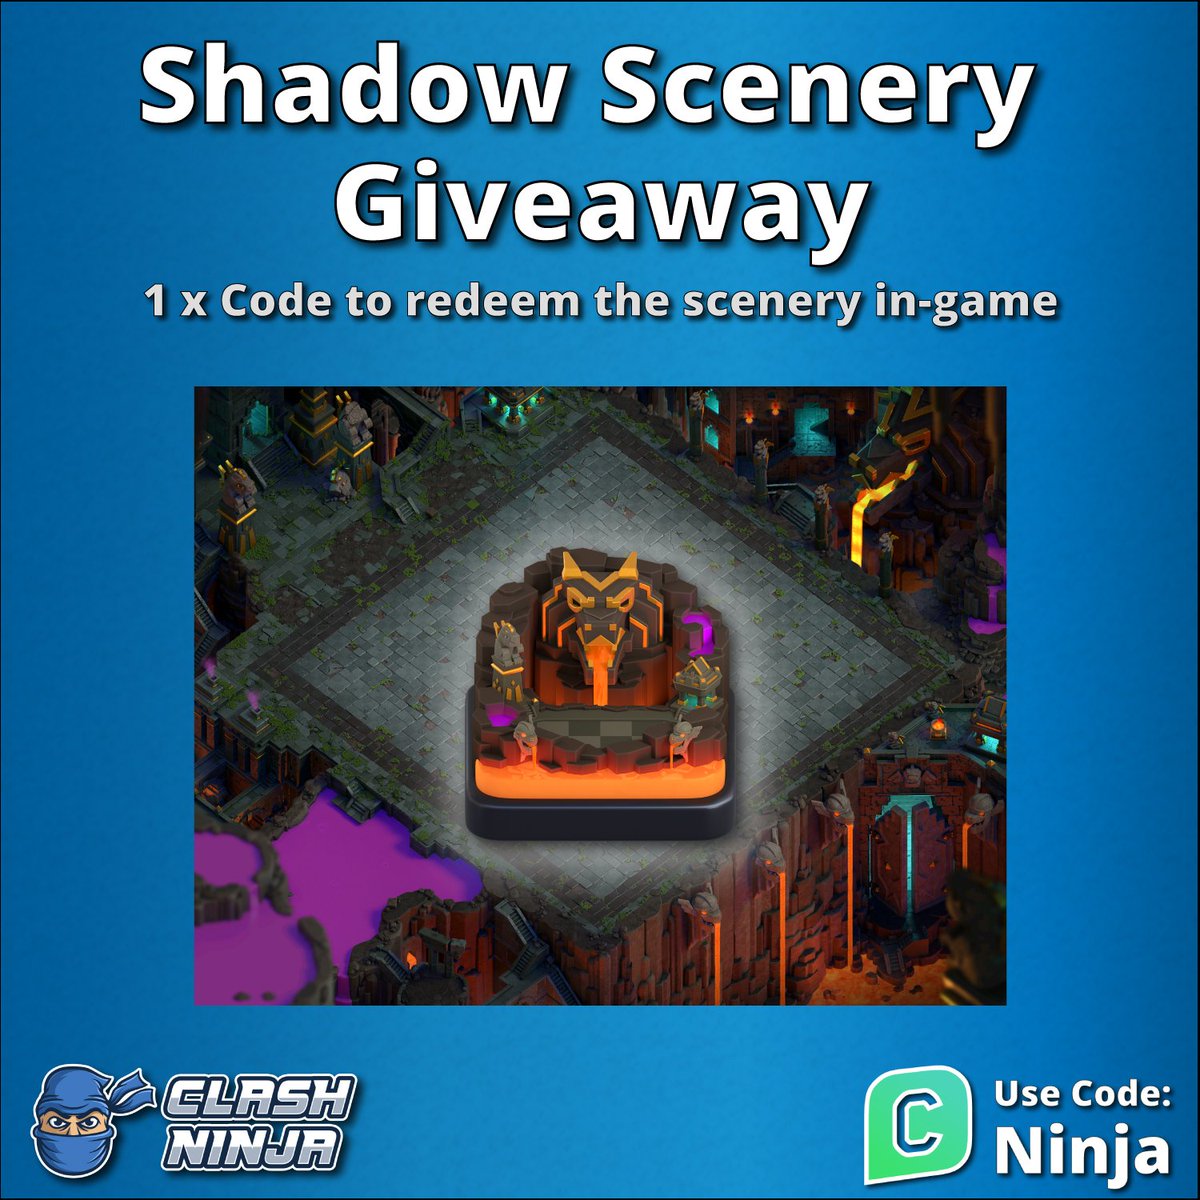 Shadow Scenery Giveaway!

1 x Shadow Scenery code

These are the last codes I have for this scenery, I'll pick 3 winners, each receiving 1 code each.

To Enter:
✅Follow @ClashDotNinja
✅Retweet this tweet

Optional:
Subscribe to youtube.com/c/clashninja

Winner announced after